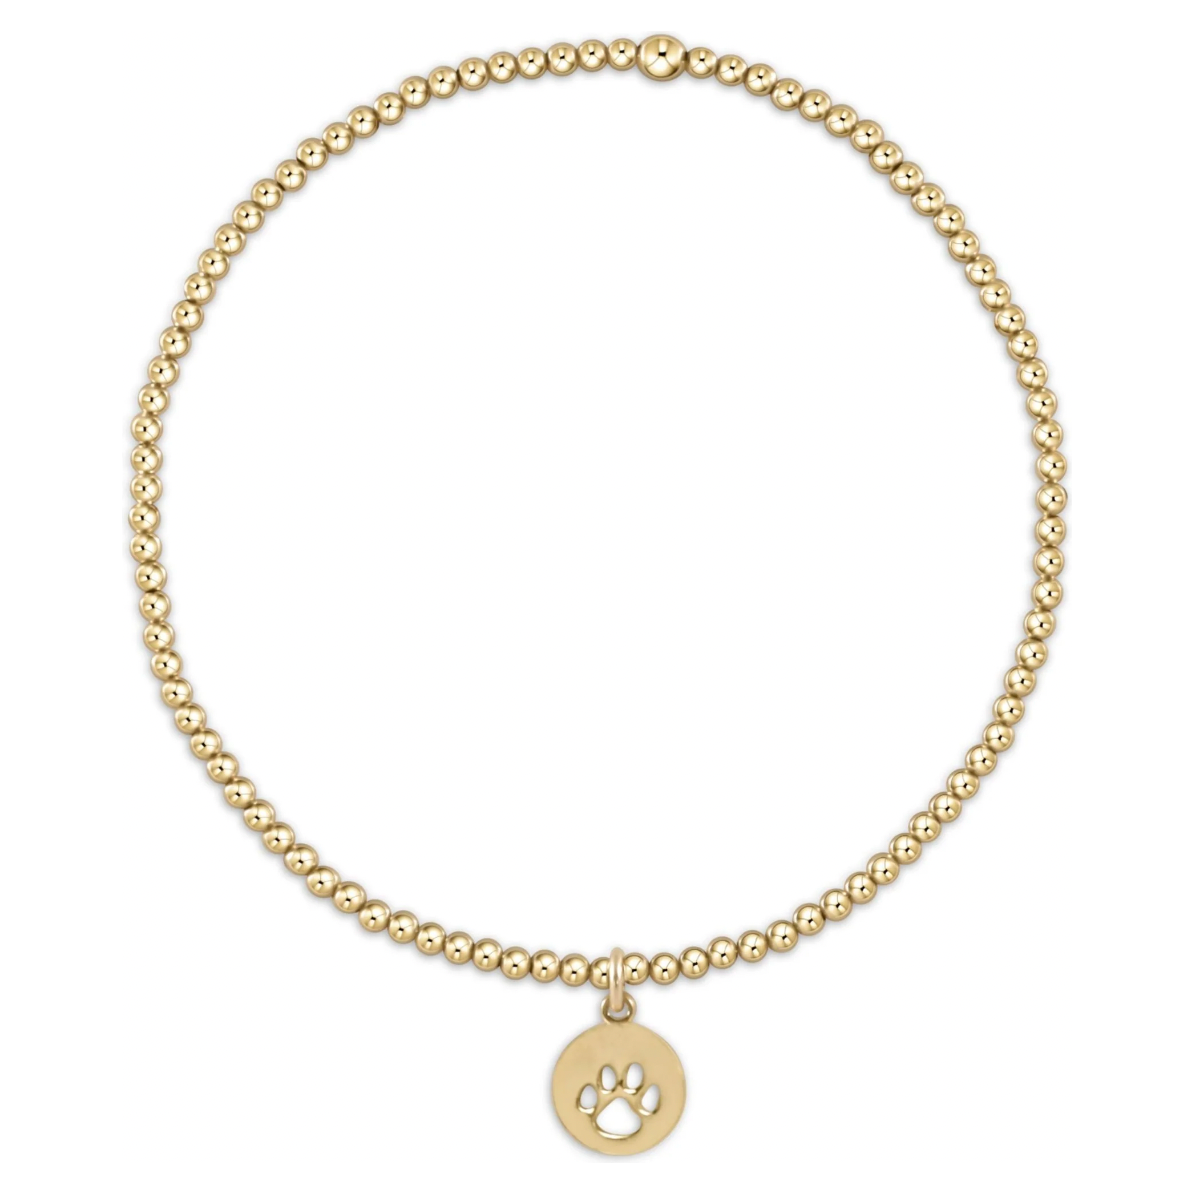 Classic Gold 2mm Bracelet - Paw Print Small Gold Disc